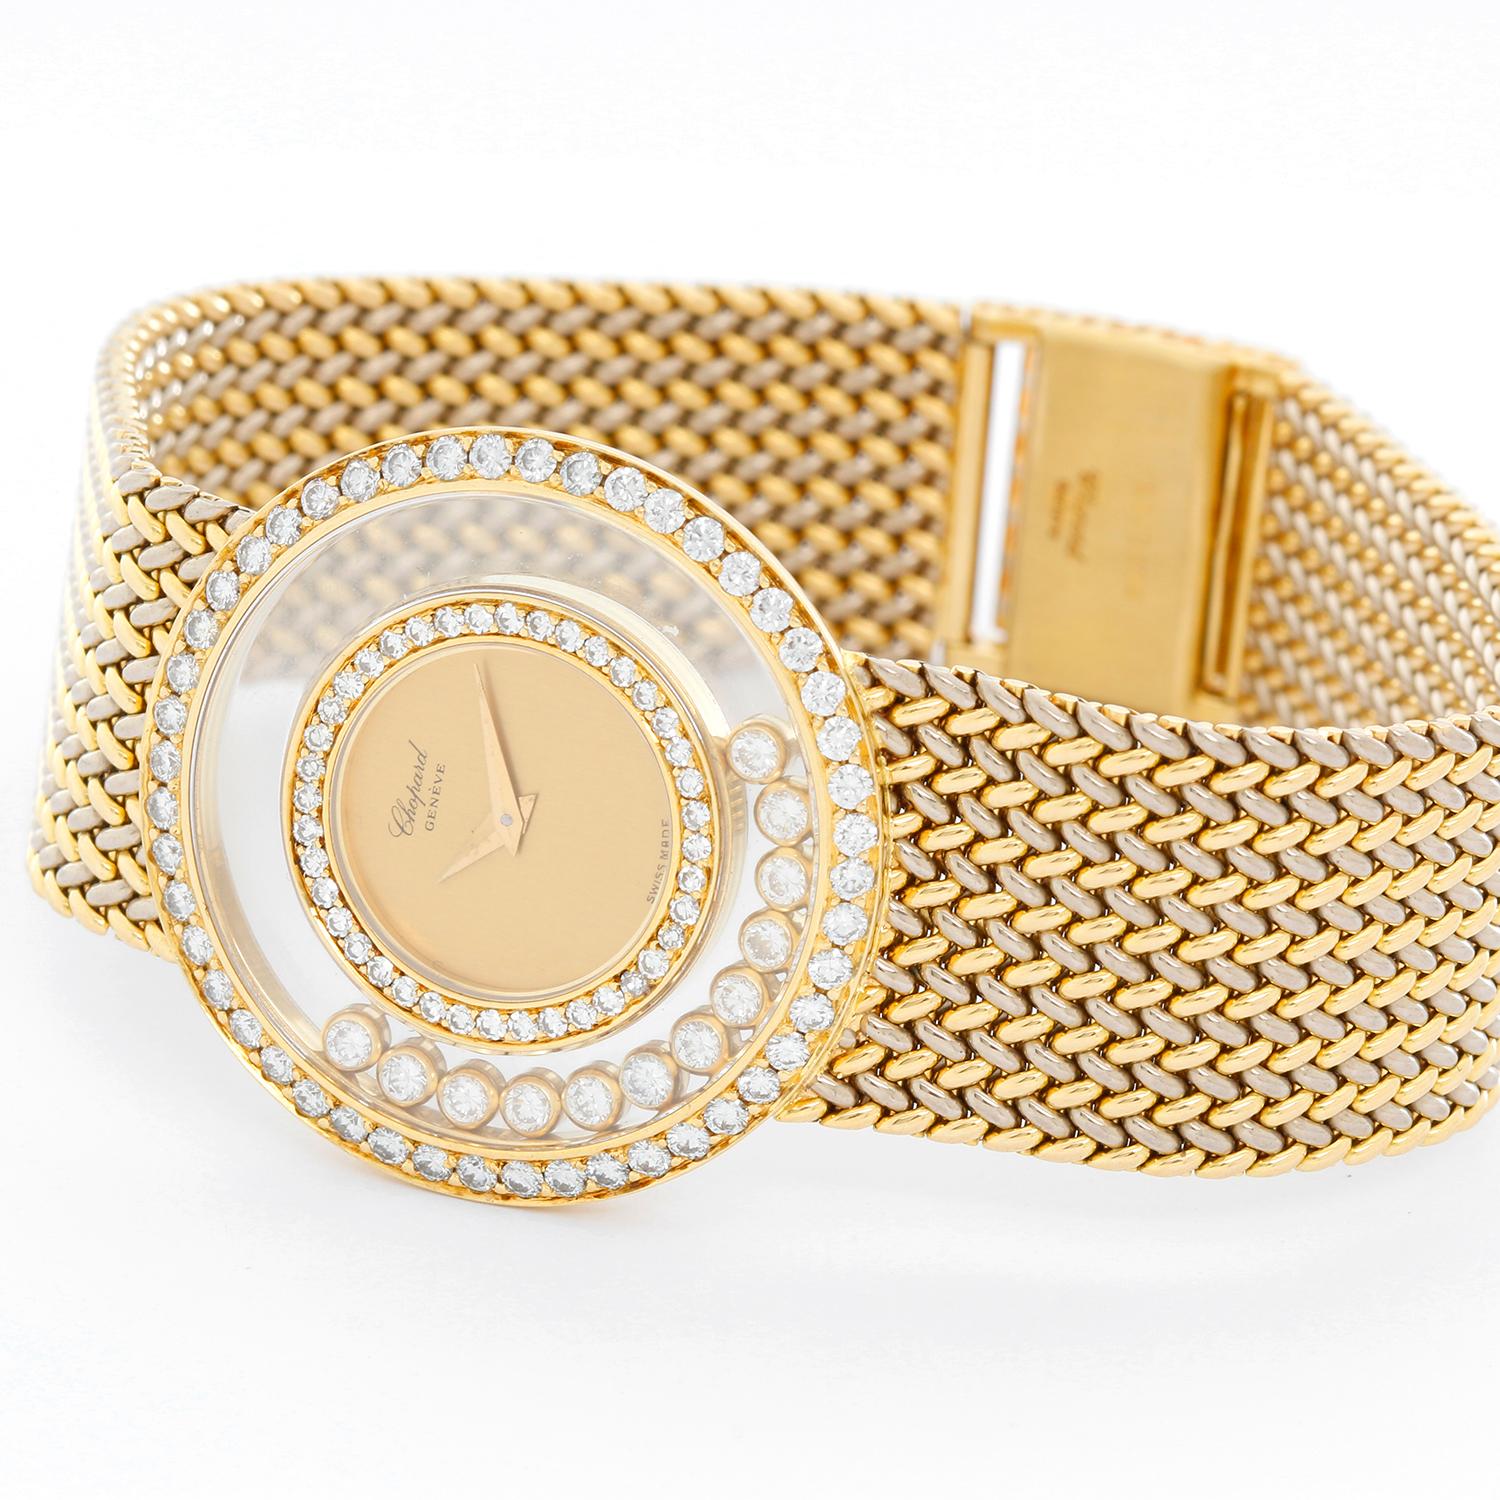 Chopard Happy Diamonds 18K Gold Ladies Watch - Quartz. 18K yellow gold case with pave-set diamond bezel; two glazed plated containing 12 free floating diamond collets ( 32 mm ). Champagne dial. Mesh 18K yellow gold bracelet. Pre-owned with Chopard